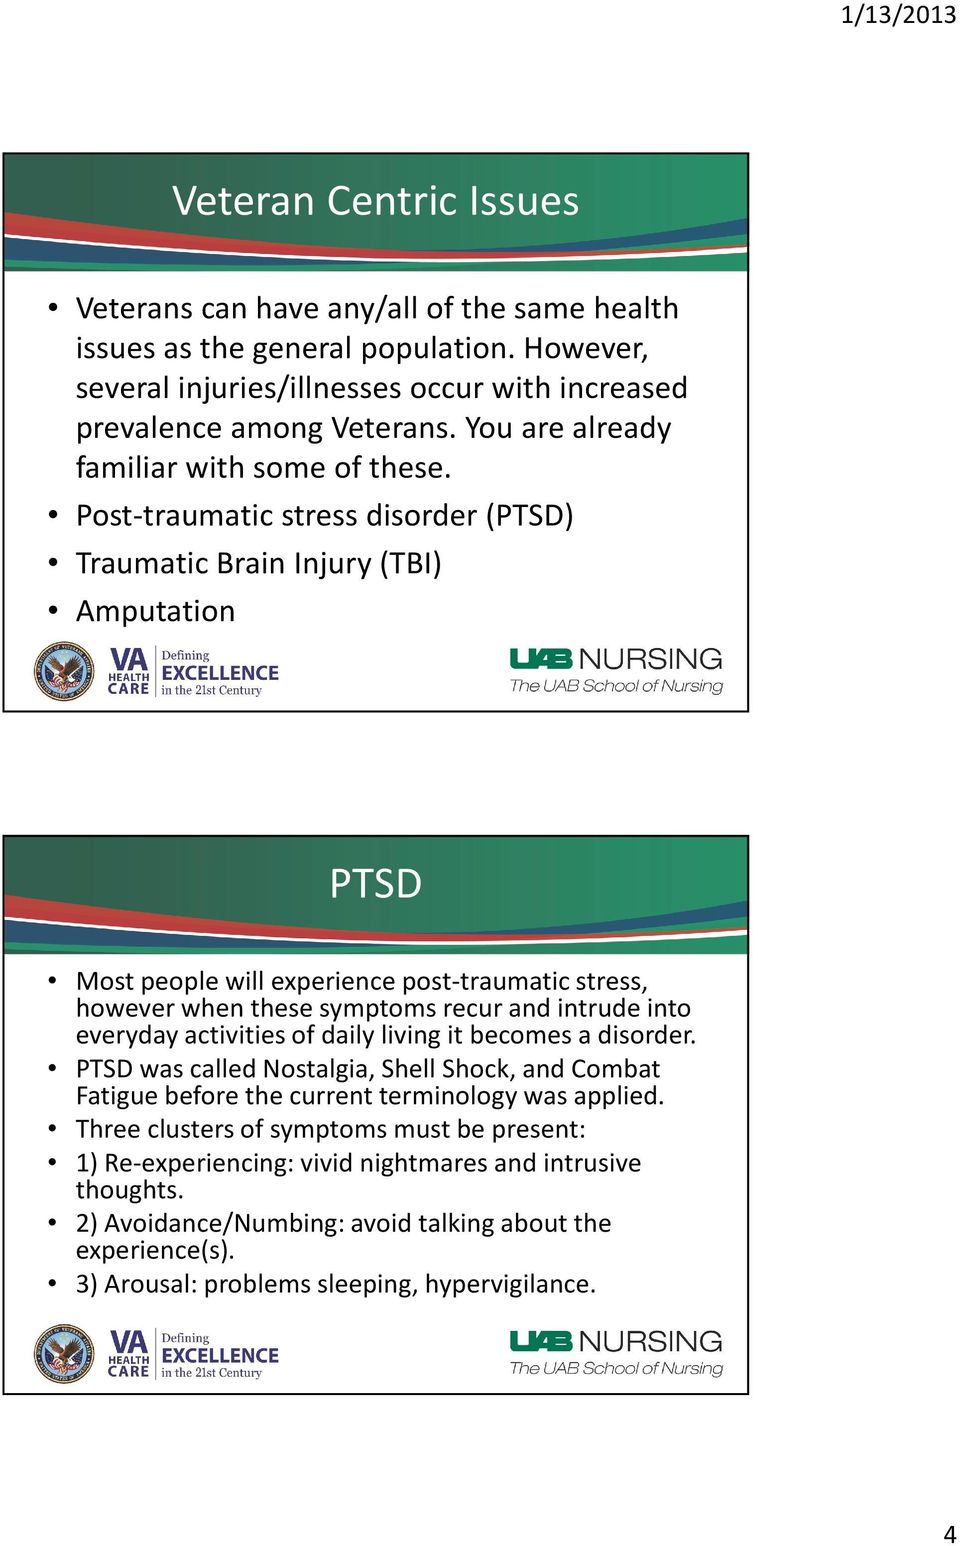 Post-traumatic stress disorder (PTSD) Traumatic Brain Injury (TBI) Amputation PTSD Most people will experience post-traumatic stress, however when these symptoms recur and intrude into everyday